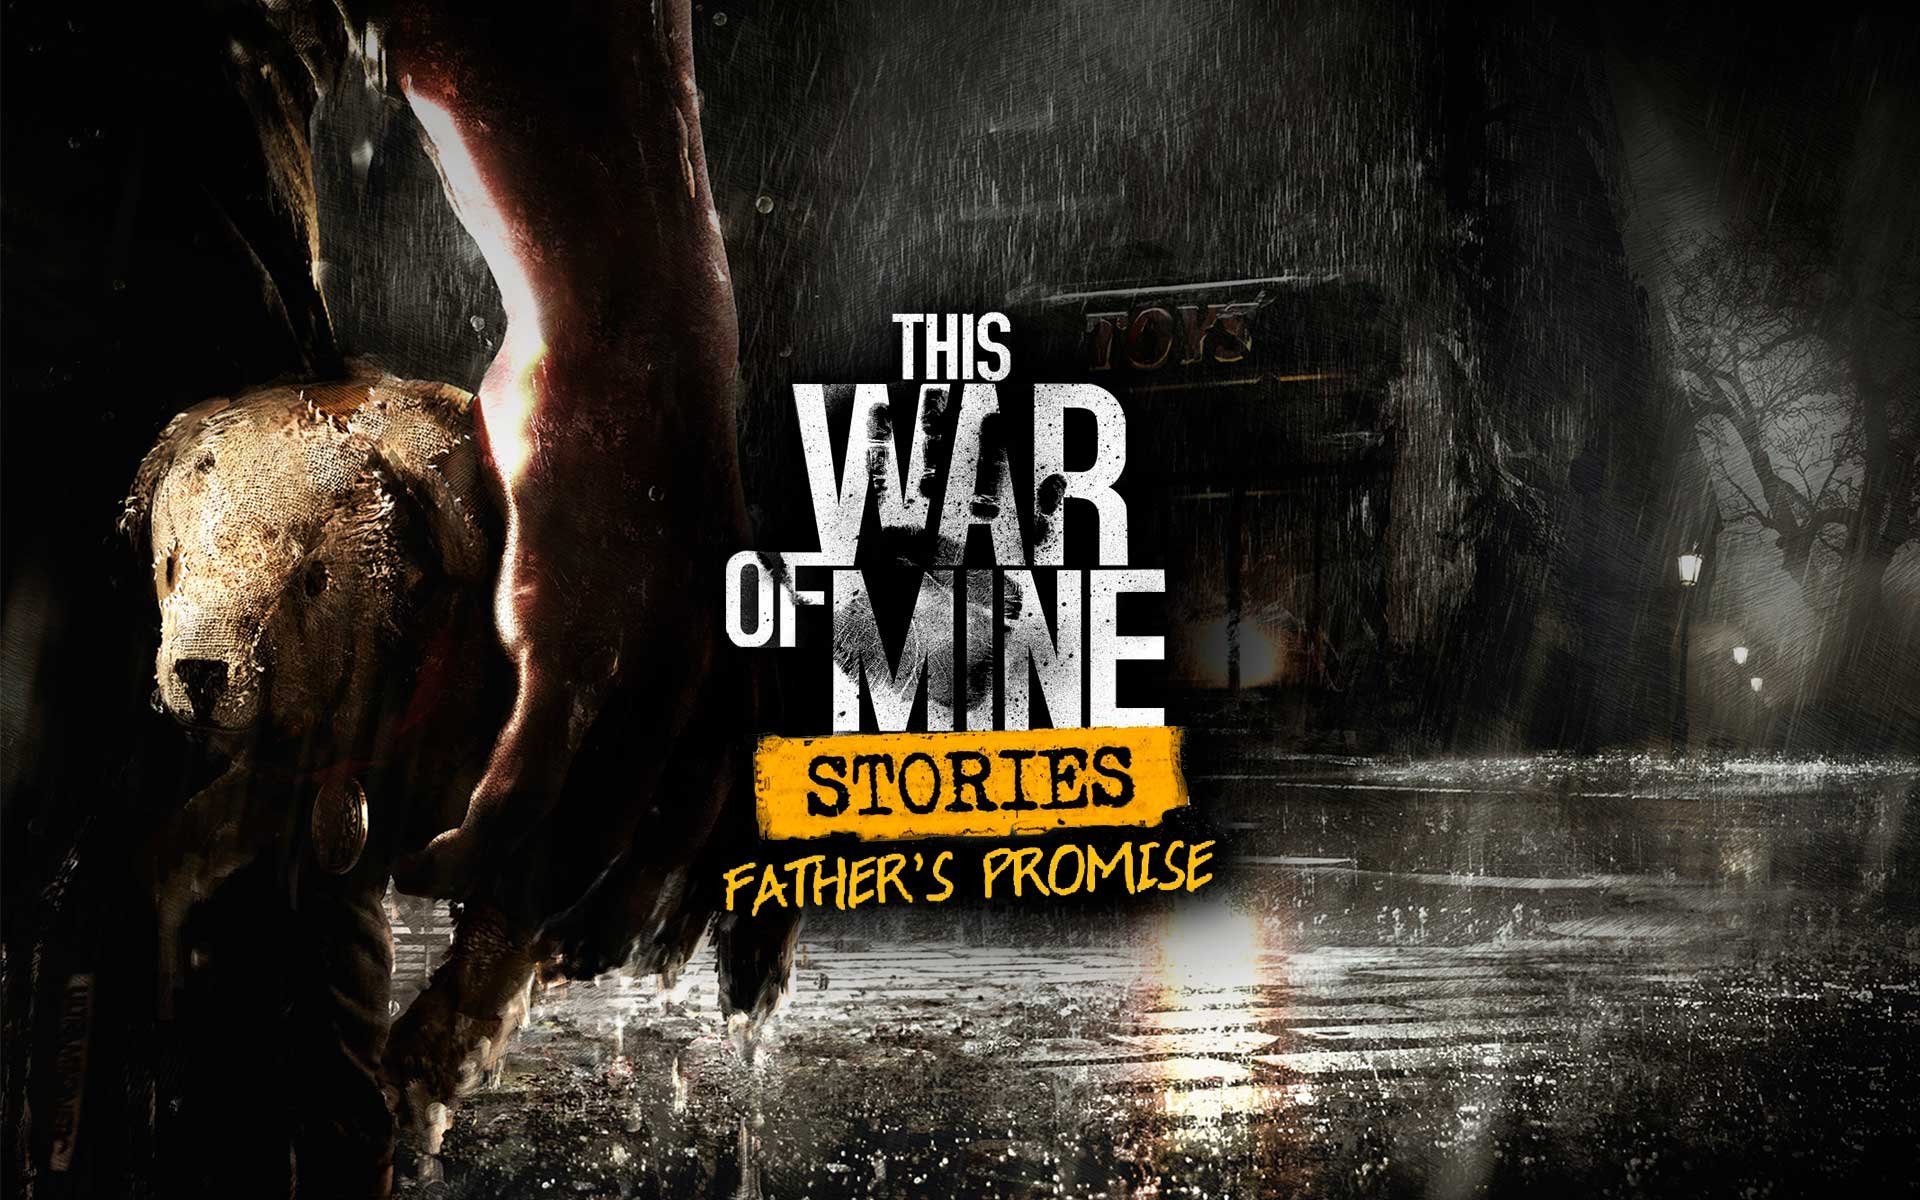 This War of Mine: Stories - Father's Promise por R$ 4.49